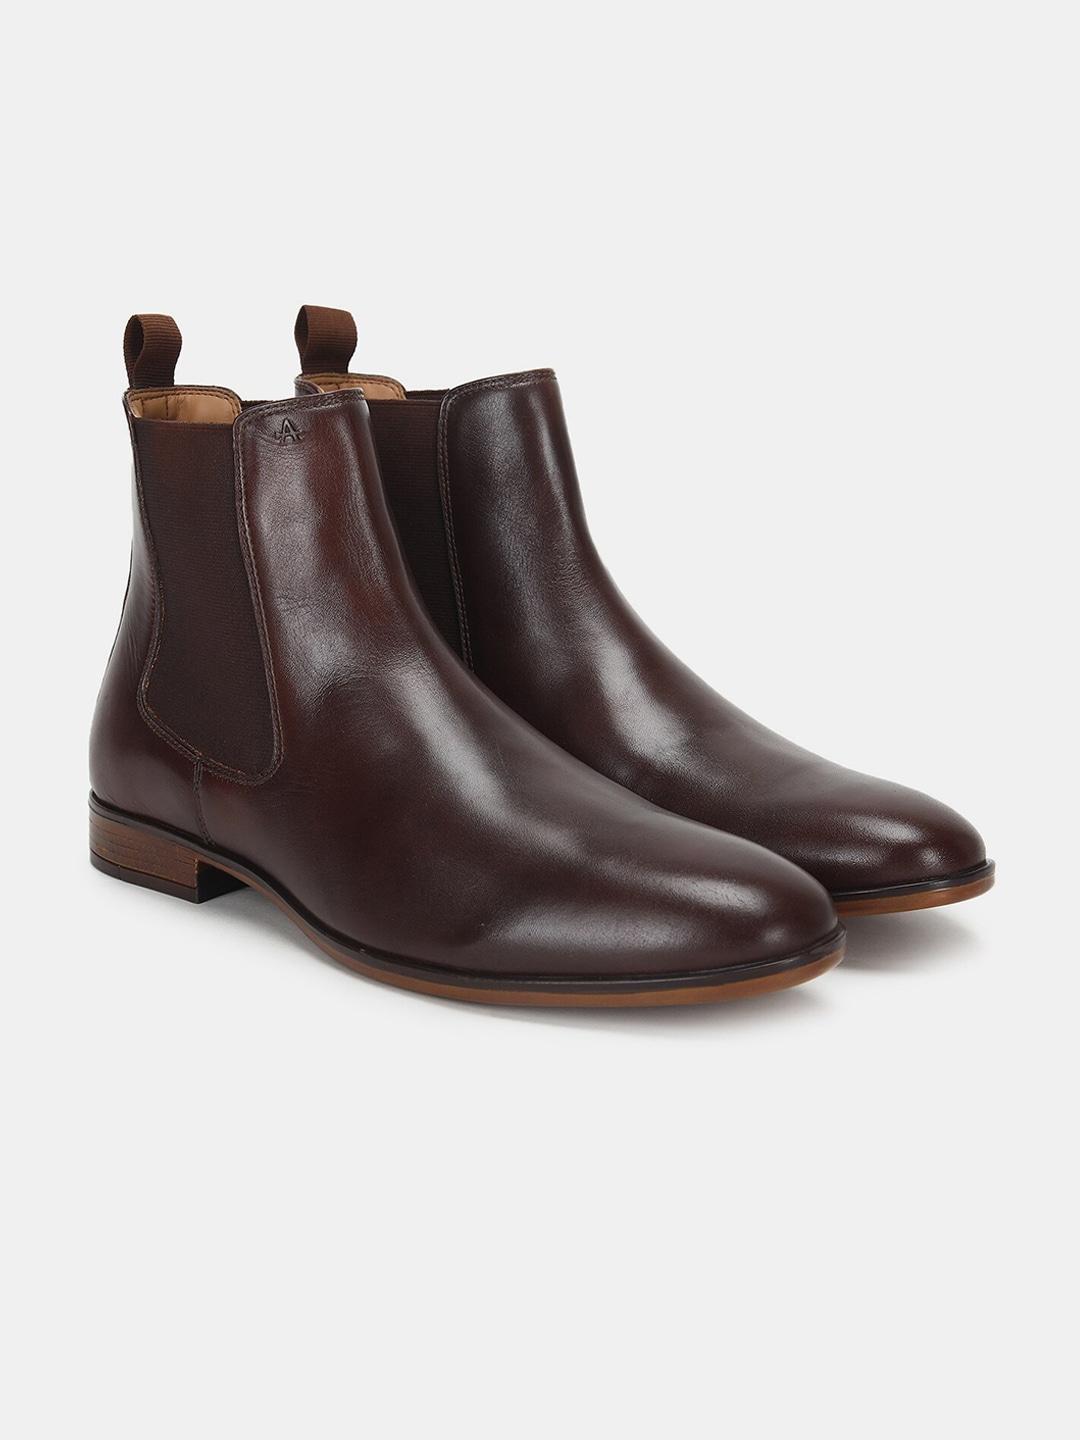 arrow men brown leather flat boots